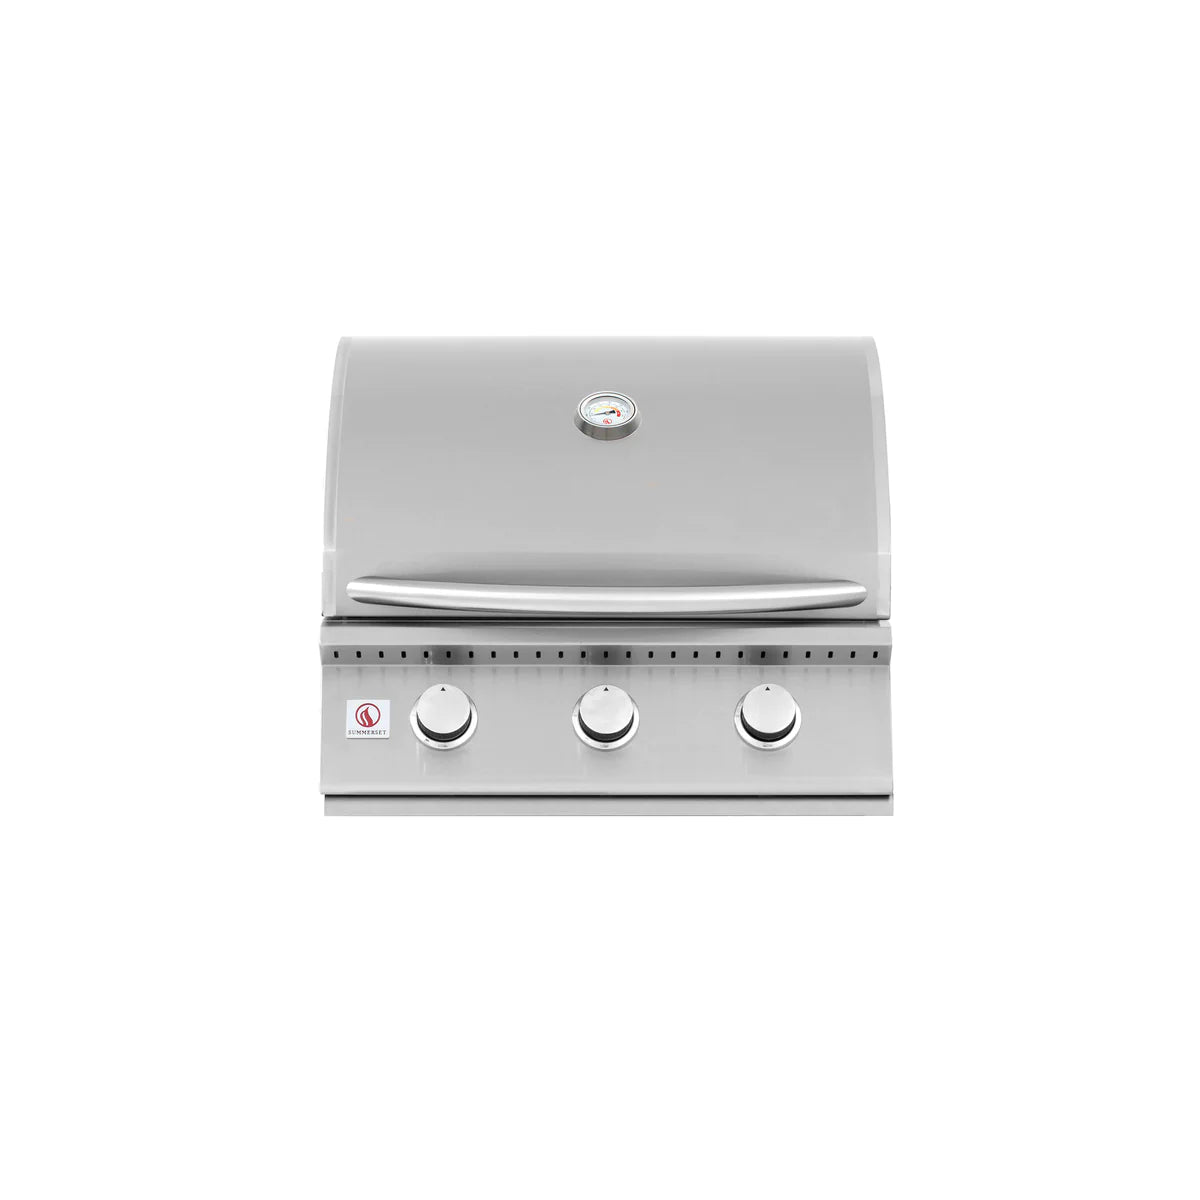 Sizzler 26" Built-in Grill